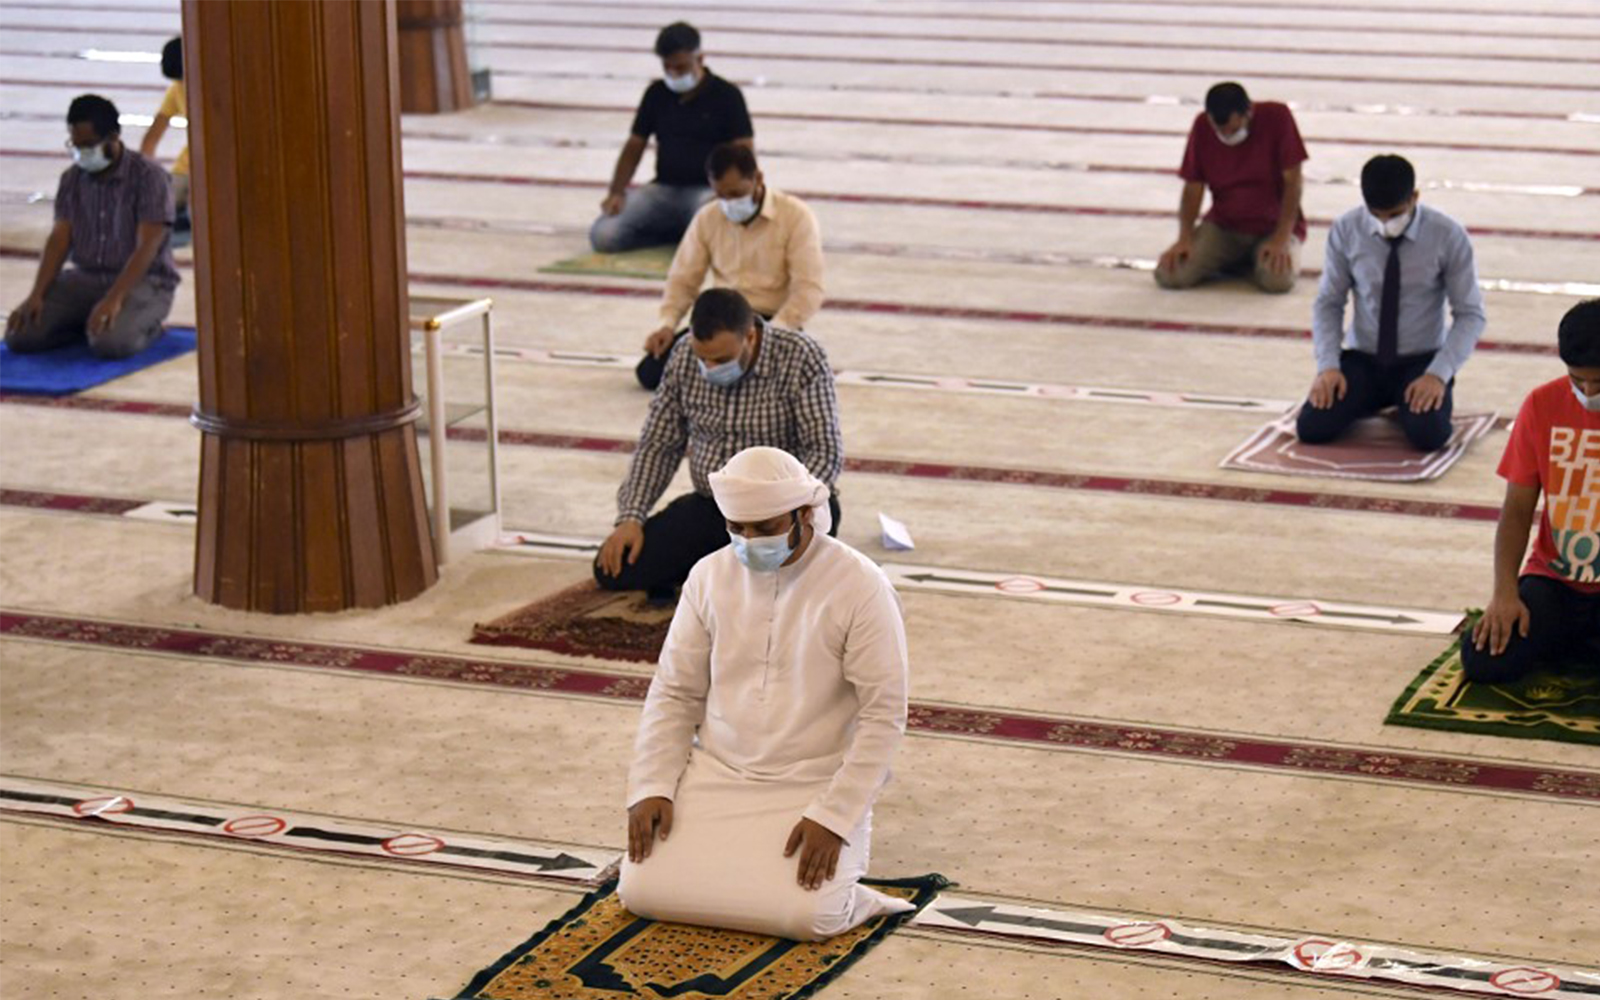 Worshipers practicing social distancing at a mosque in the emirate of Sharjah in the United Arab Emirates, July 1, 2020. (Karim Sahib/AFP)